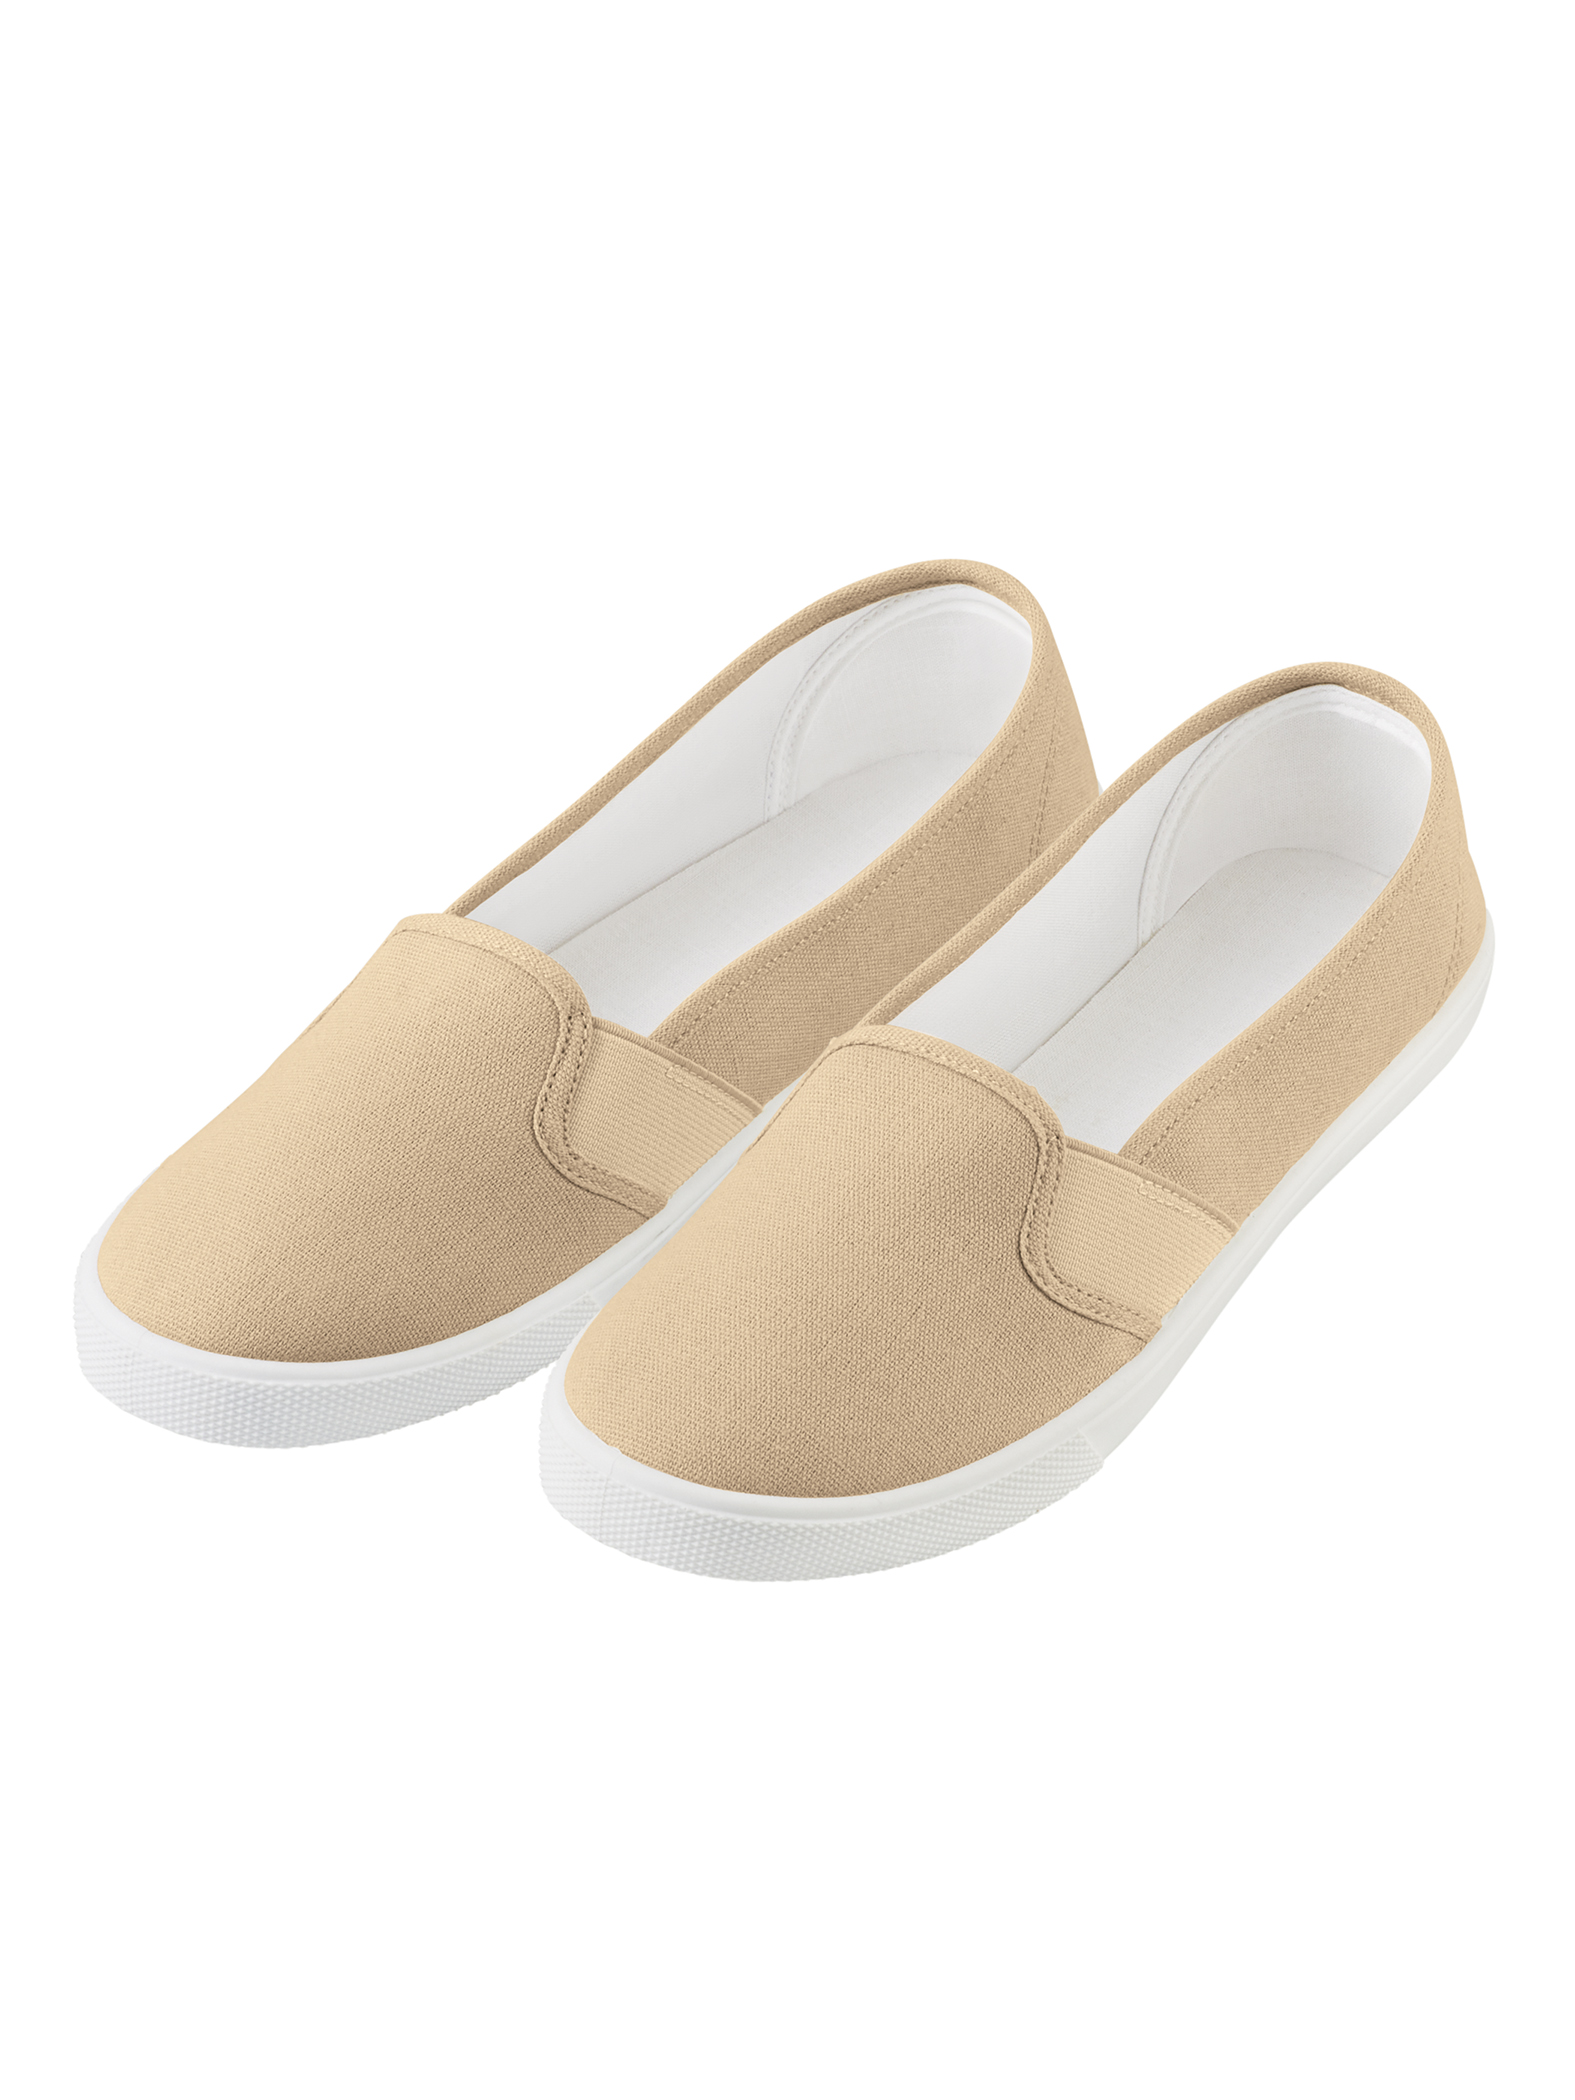 Collections Etc Women's Elasticized Stretch Gore Canvas Slip-On ...